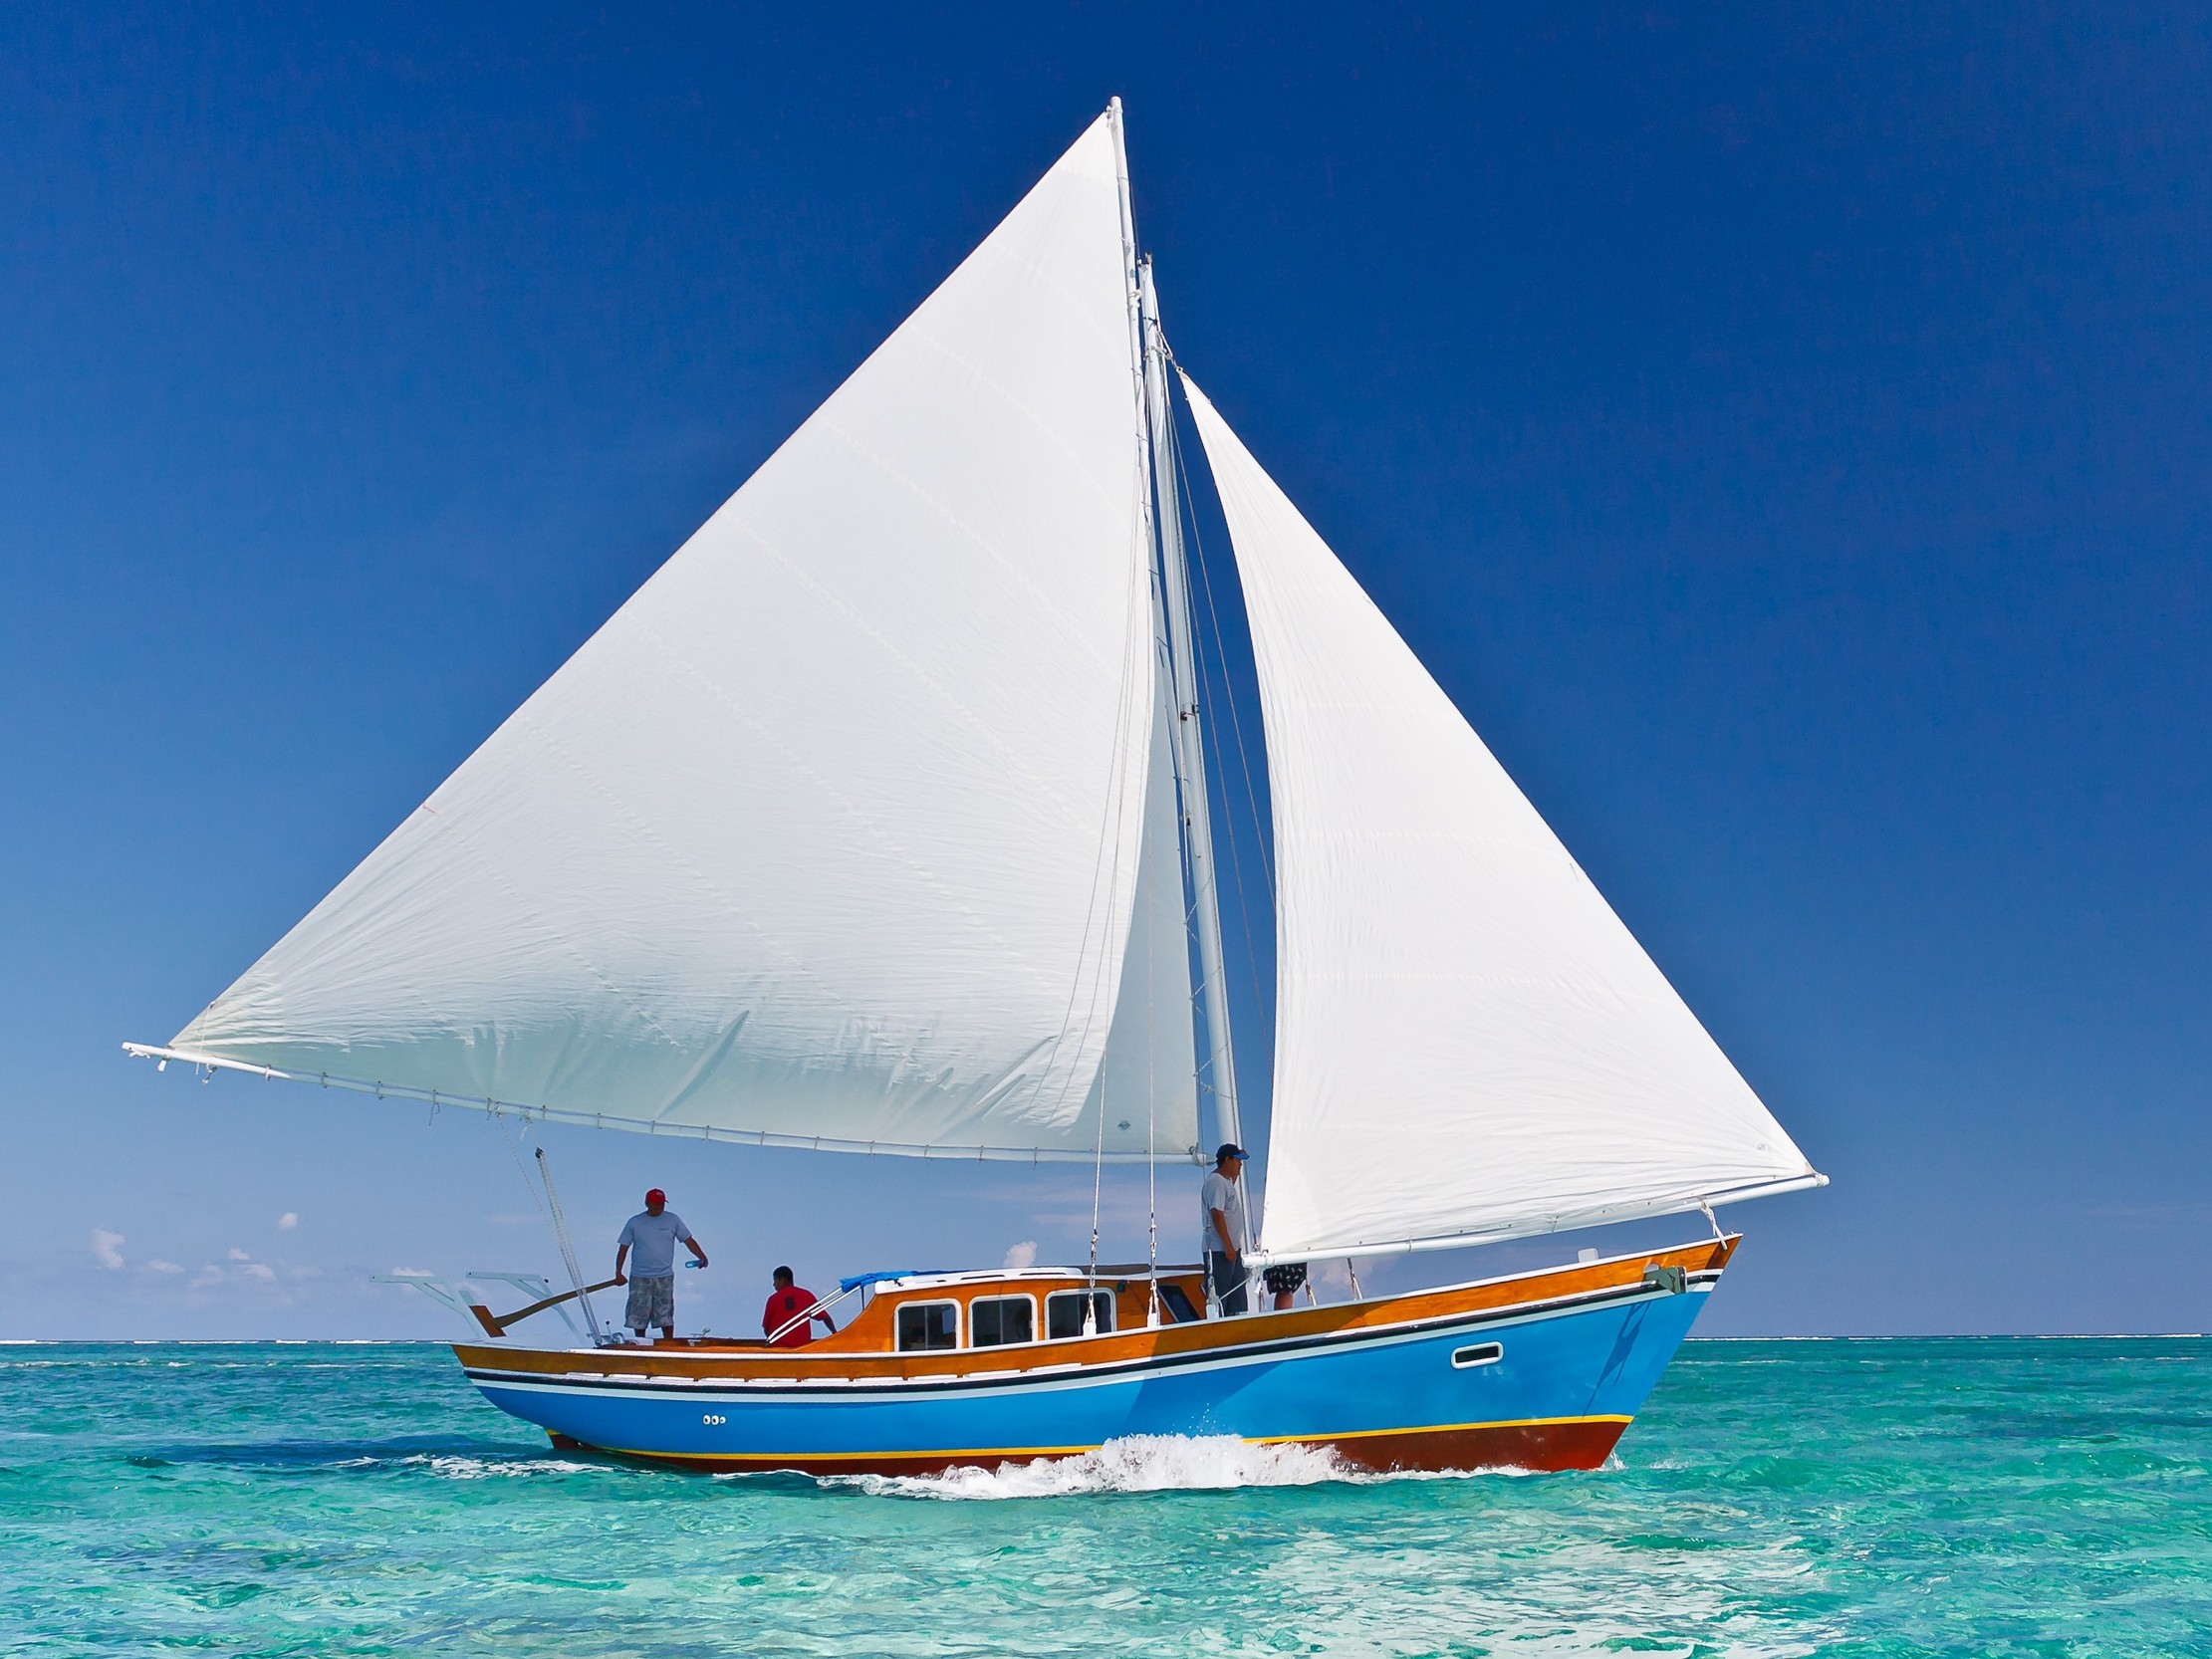 La Sirena Azul offers a range of sailing tours from San Pedro Town